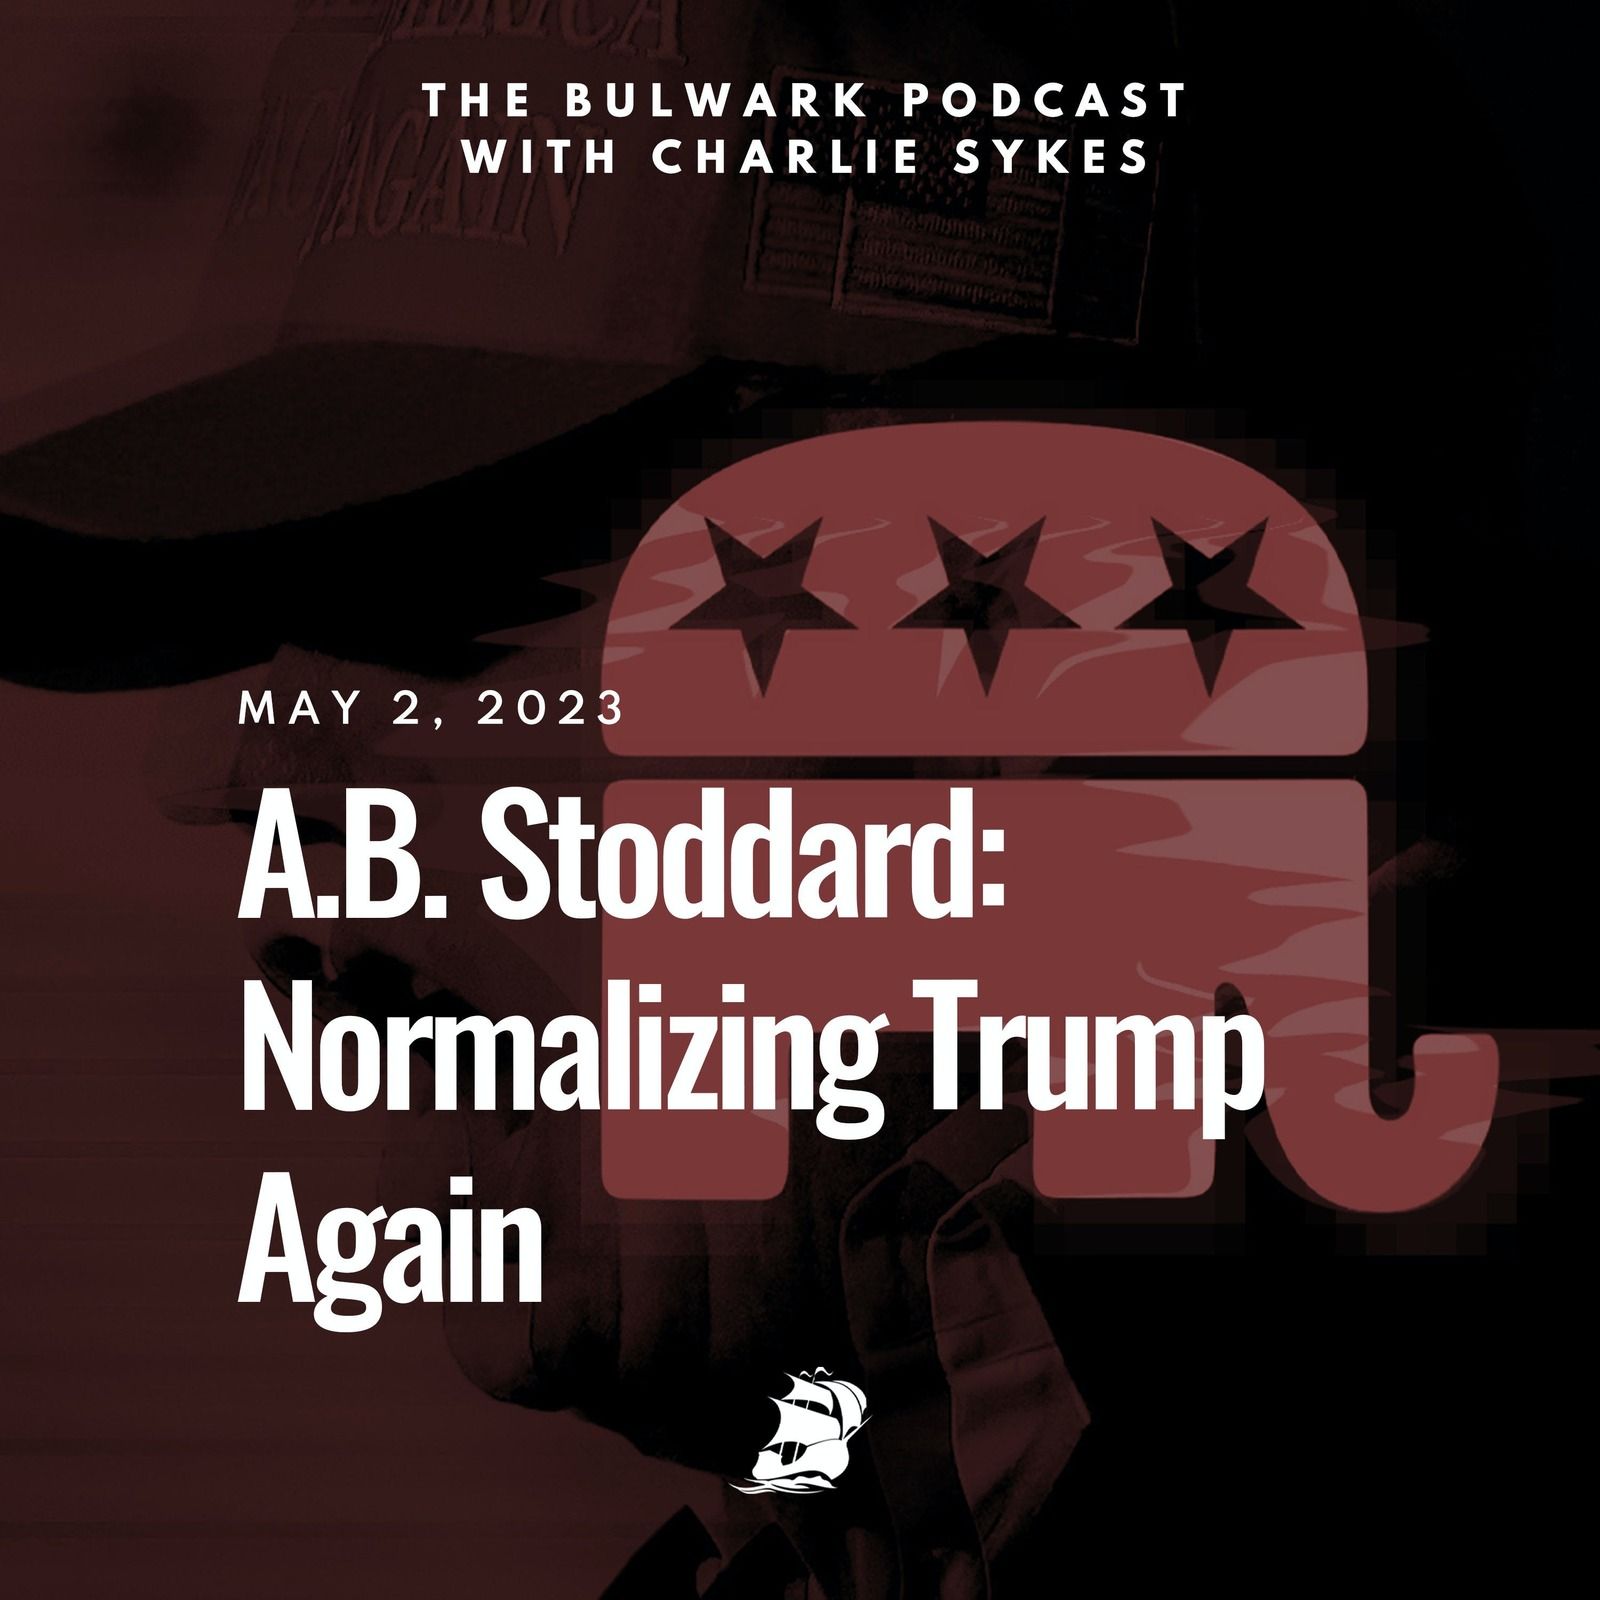 A.B. Stoddard: Normalizing Trump Again by The Bulwark Podcast